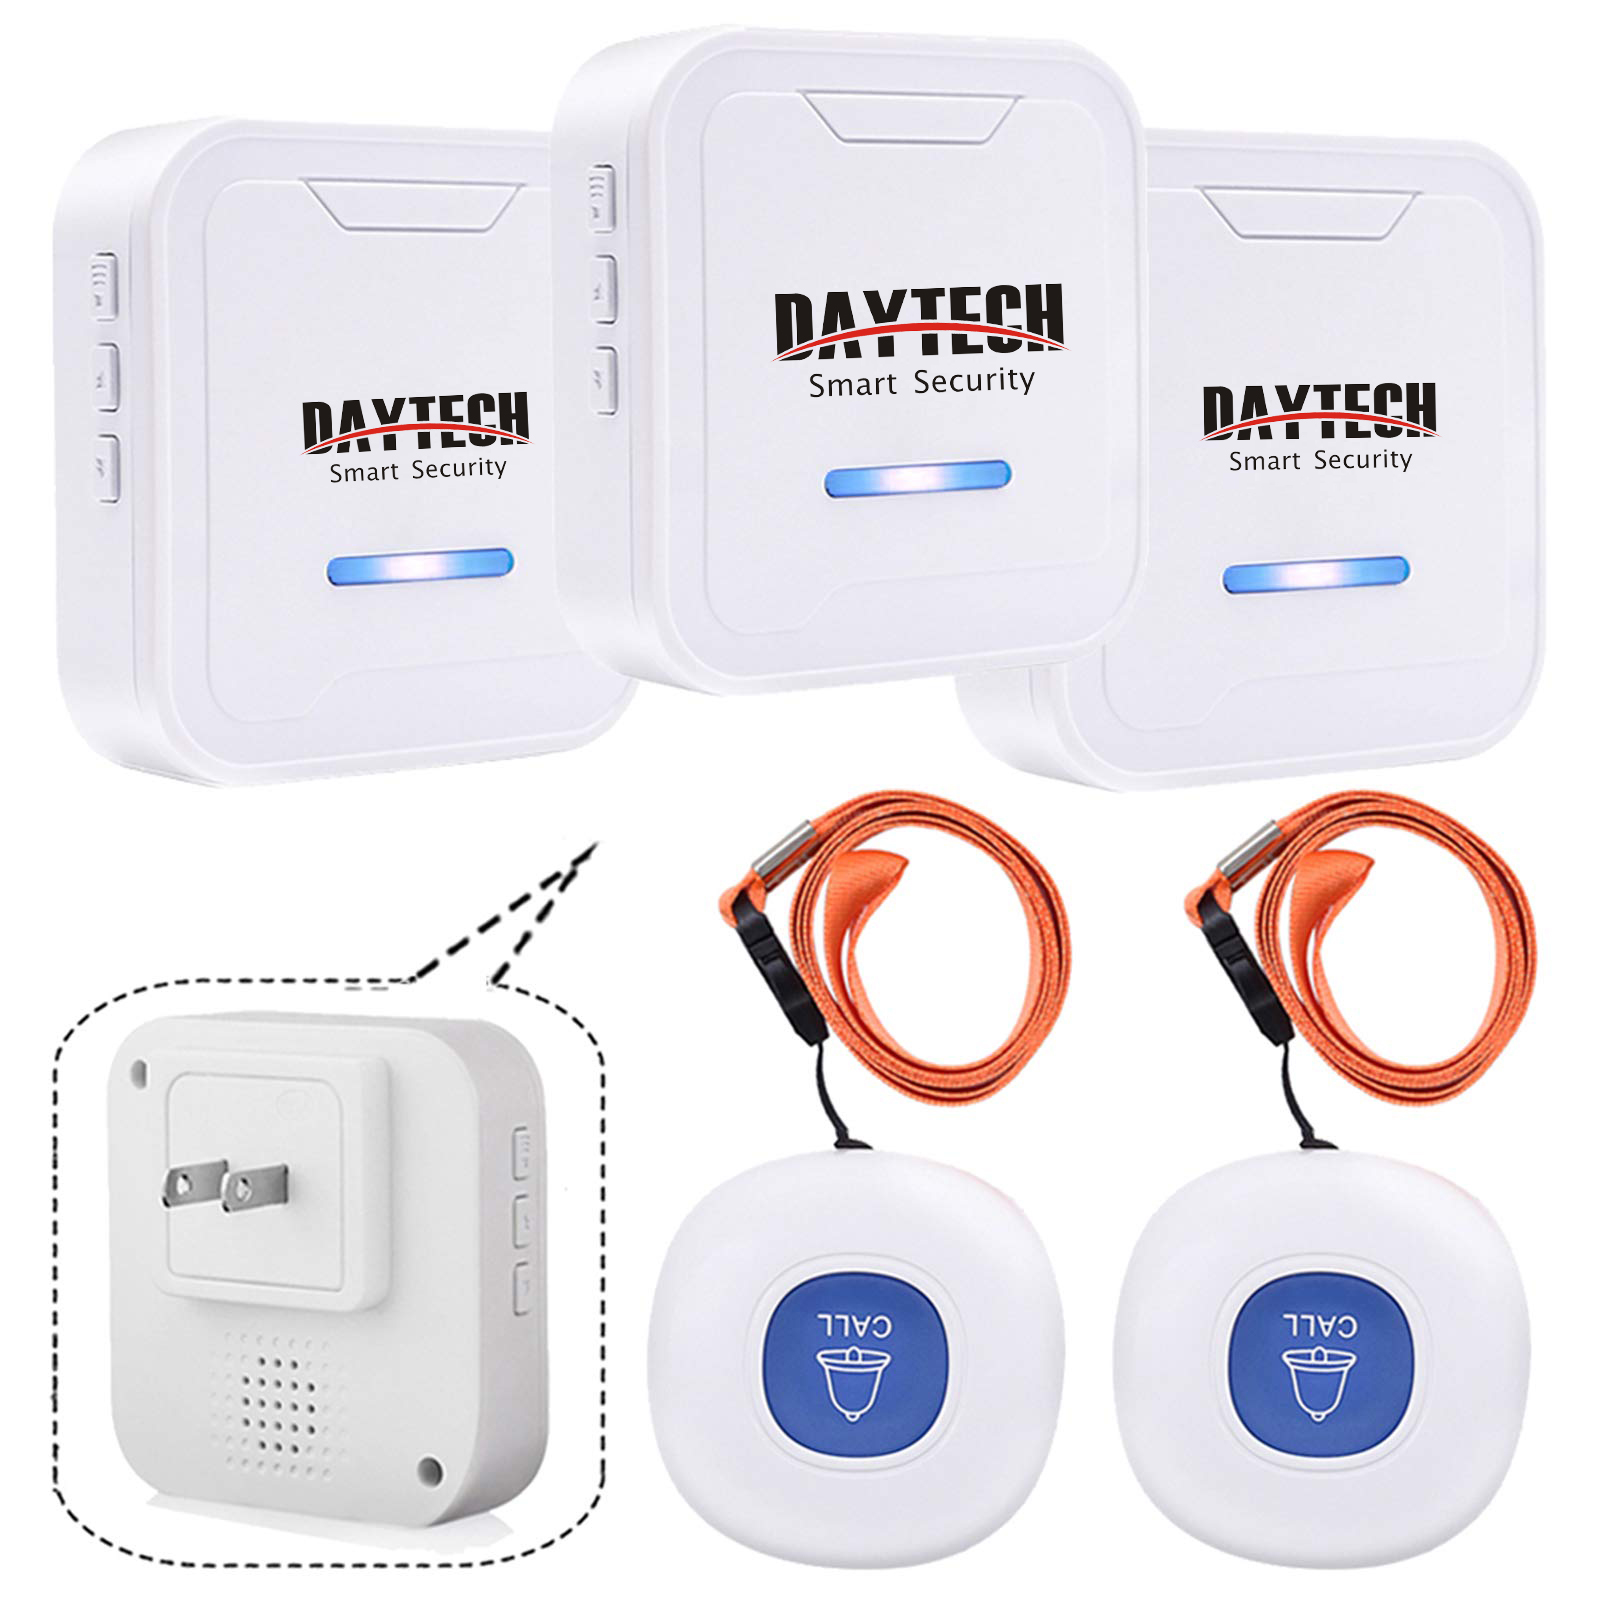 Daytech Wireless Caregiver Pager Call Button 500Feet Nurse Alert System for Elderly/Seniors/Home with 3 Receivers 2 Waterproof Panic Buttons/Transmitters pager for the elderly